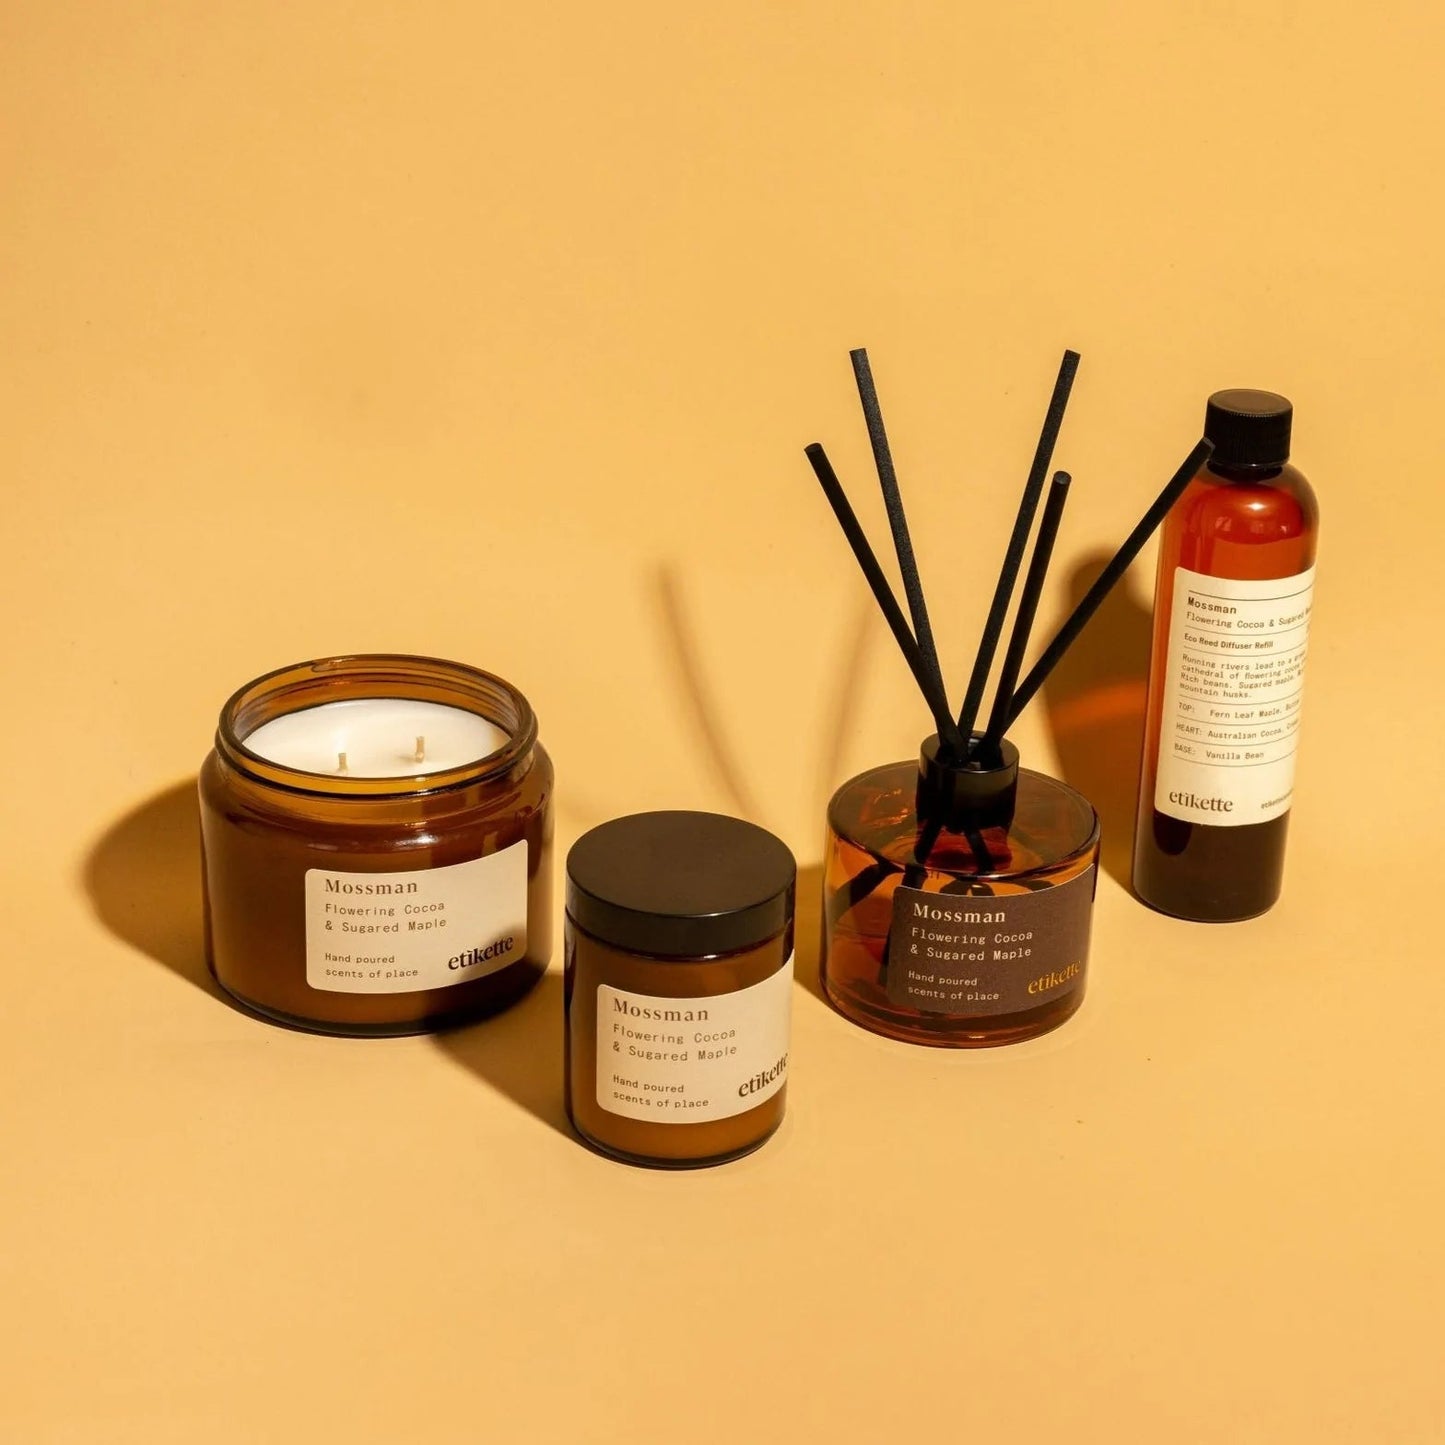 Mossman Flowering Cocoa & Sugared Maple Reed Diffuser by Etikette - Toast and honey studio